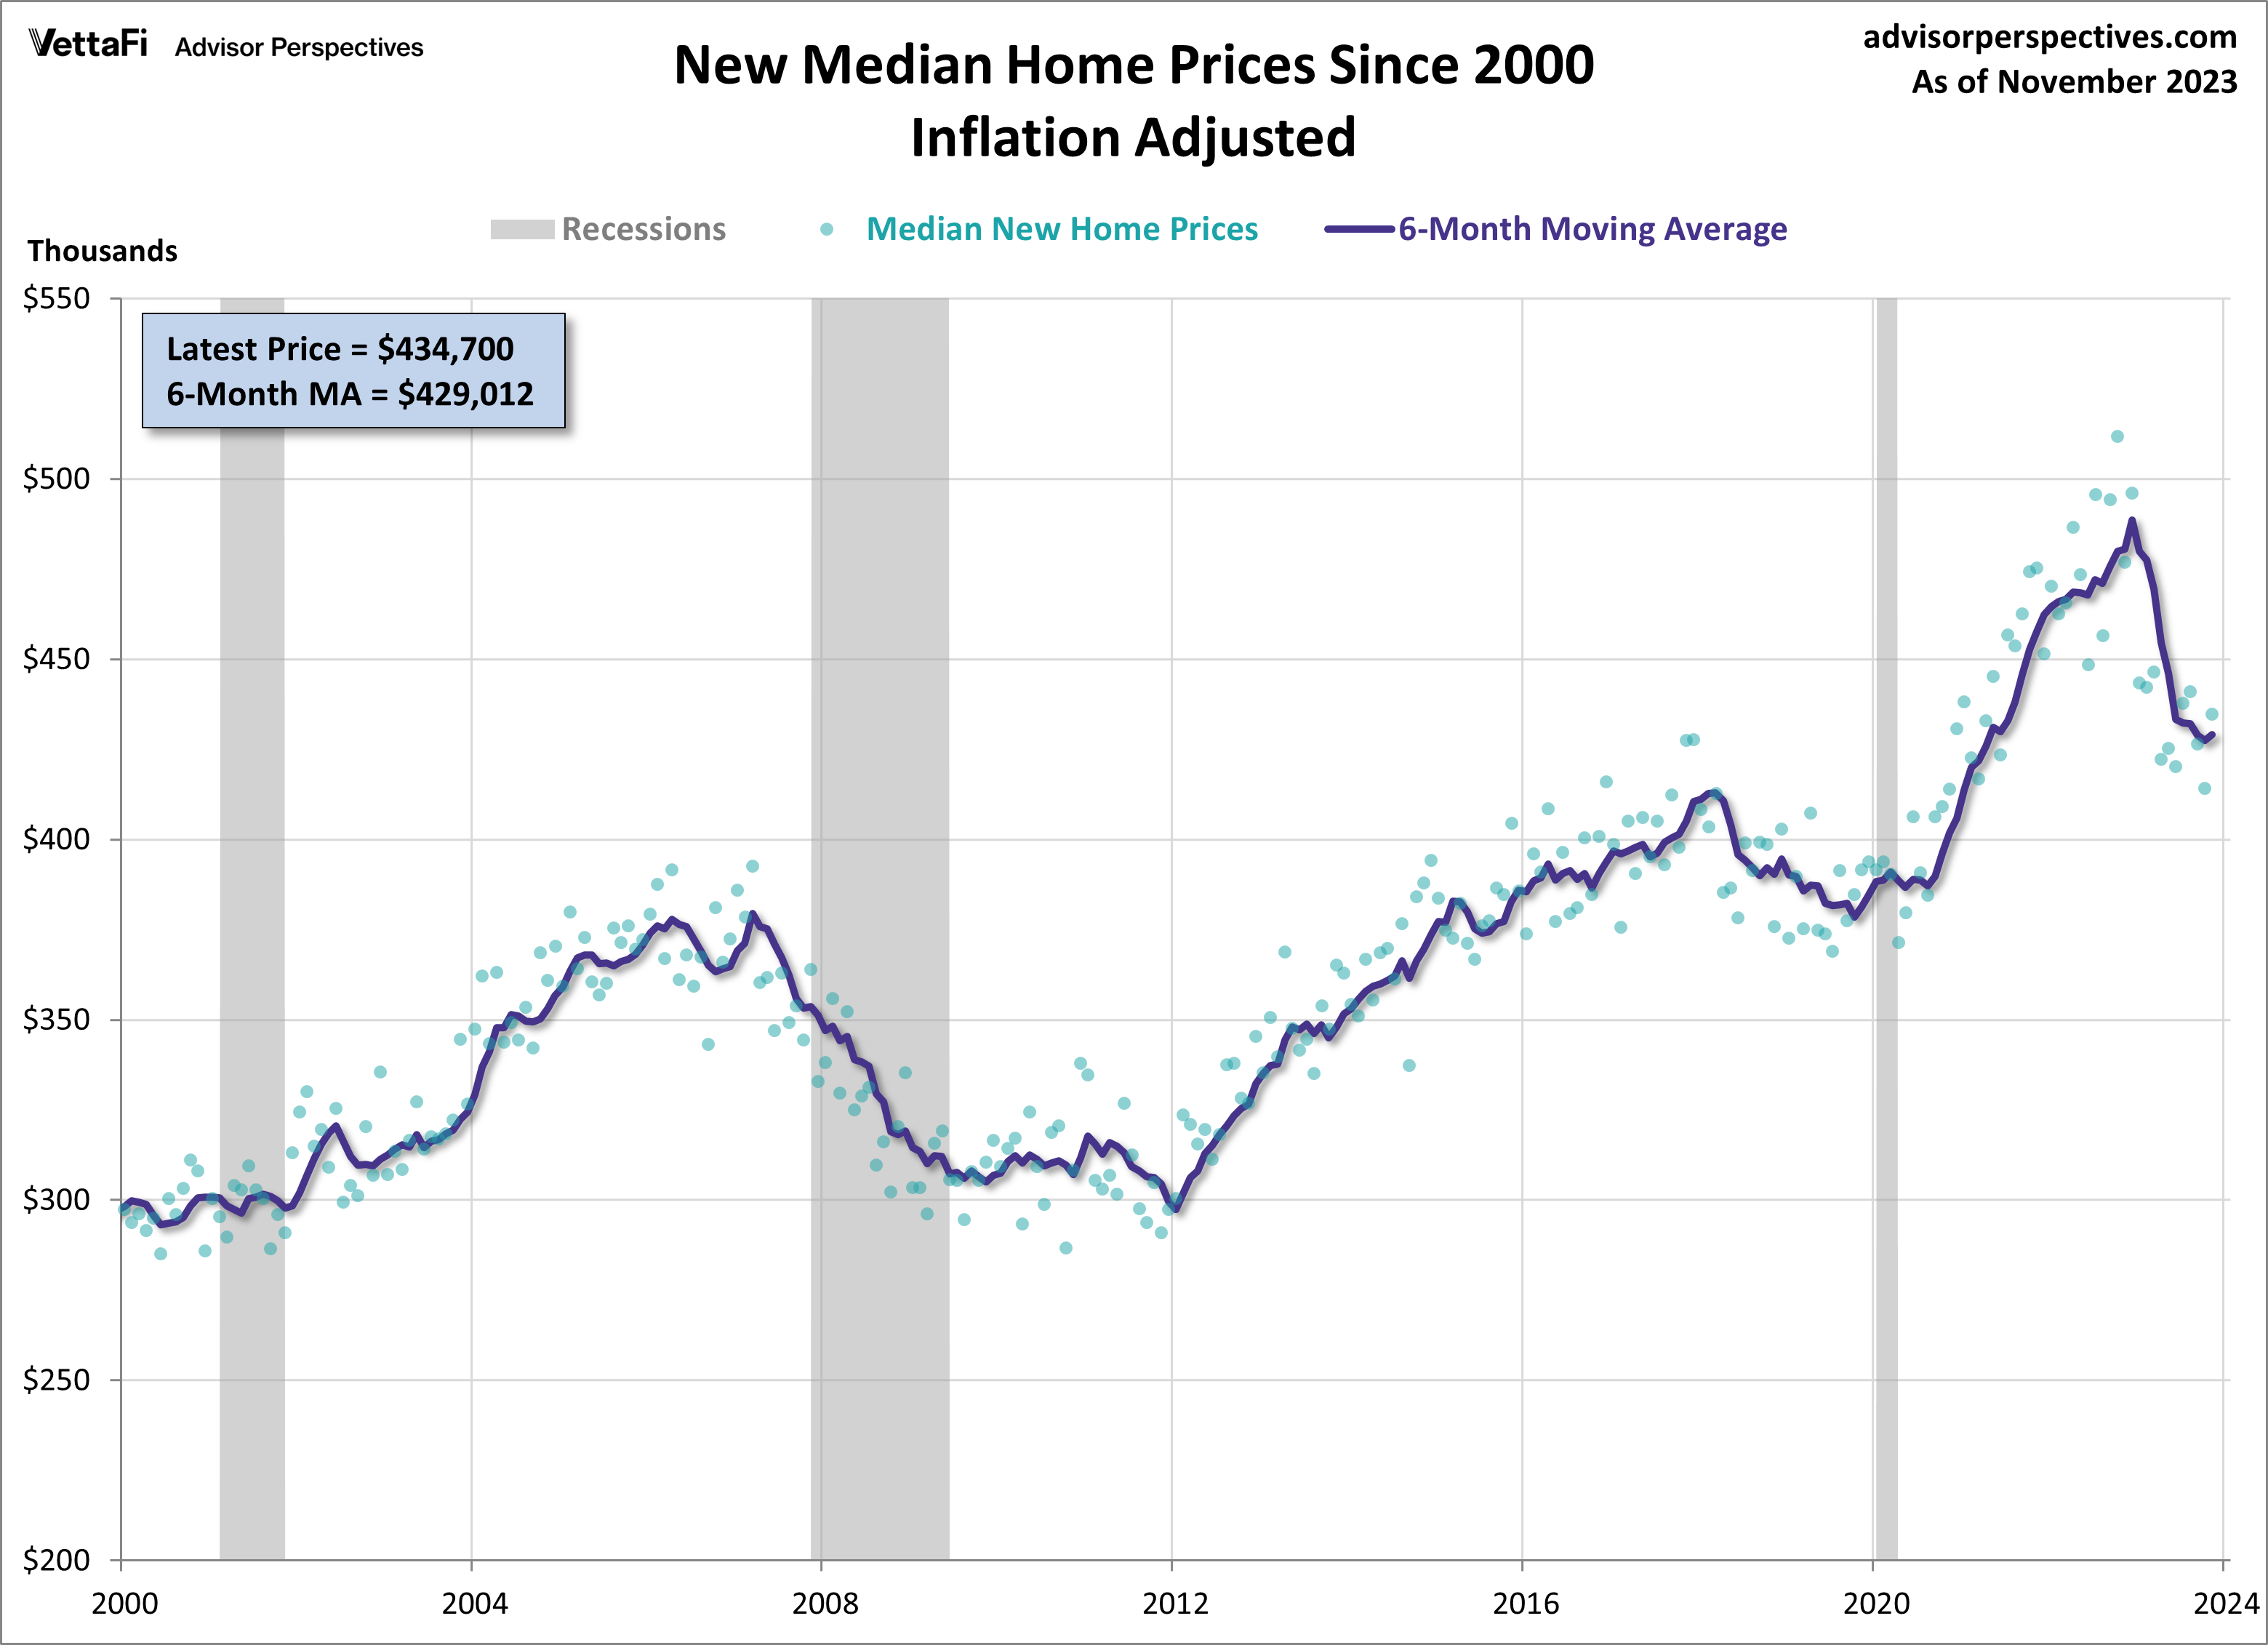 New Median Home Prices Since 2000